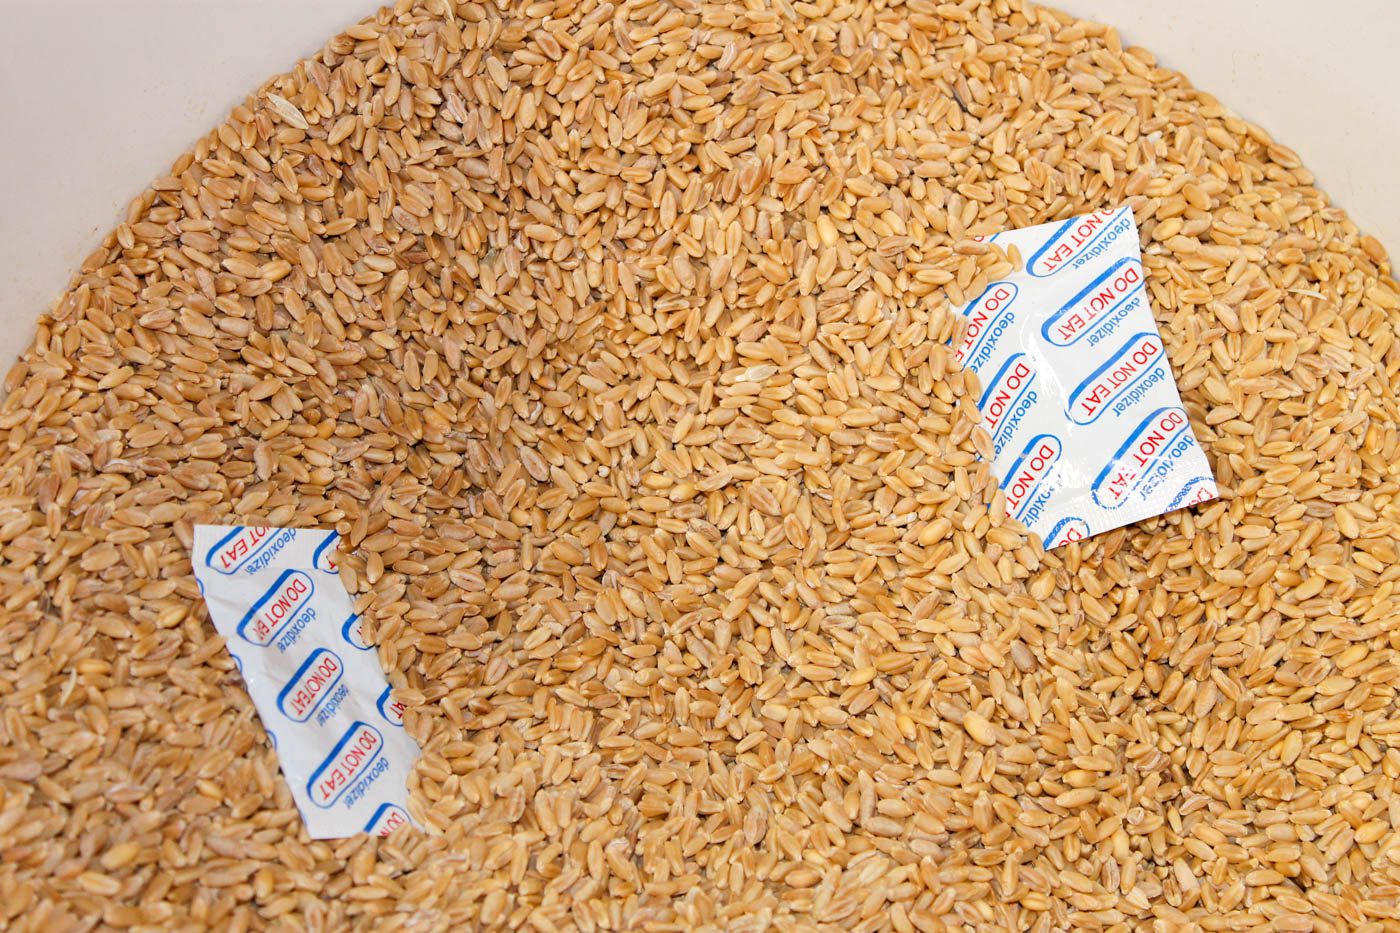 bucket of grains with two oxygen absorbers sitting inside